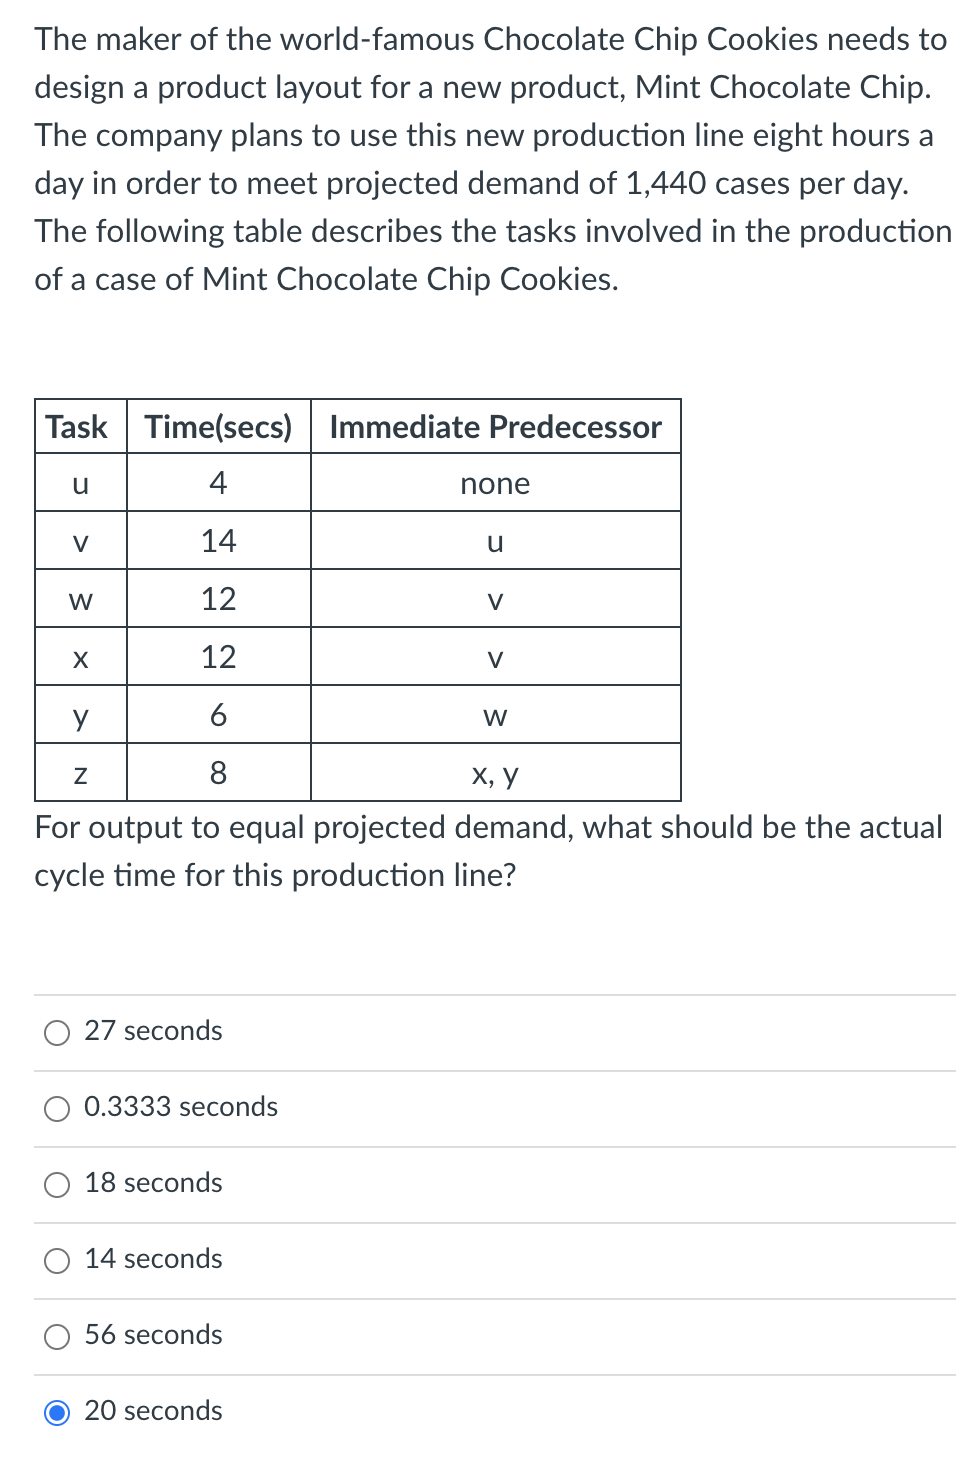 The maker of the world-famous Chocolate Chip Cookies needs to
design a product layout for a new product, Mint Chocolate Chip.
The company plans to use this new production line eight hours a
day in order to meet projected demand of 1,440 cases per day.
The following table describes the tasks involved in the production
of a case of Mint Chocolate Chip Cookies.
Task Time(secs) Immediate Predecessor
4
none
V
14
W
12
V
12
V
6
W
8
х, у
For output to equal projected demand, what should be the actual
cycle time for this production line?
27 seconds
0.3333 seconds
18 seconds
14 seconds
56 seconds
20 seconds
N
